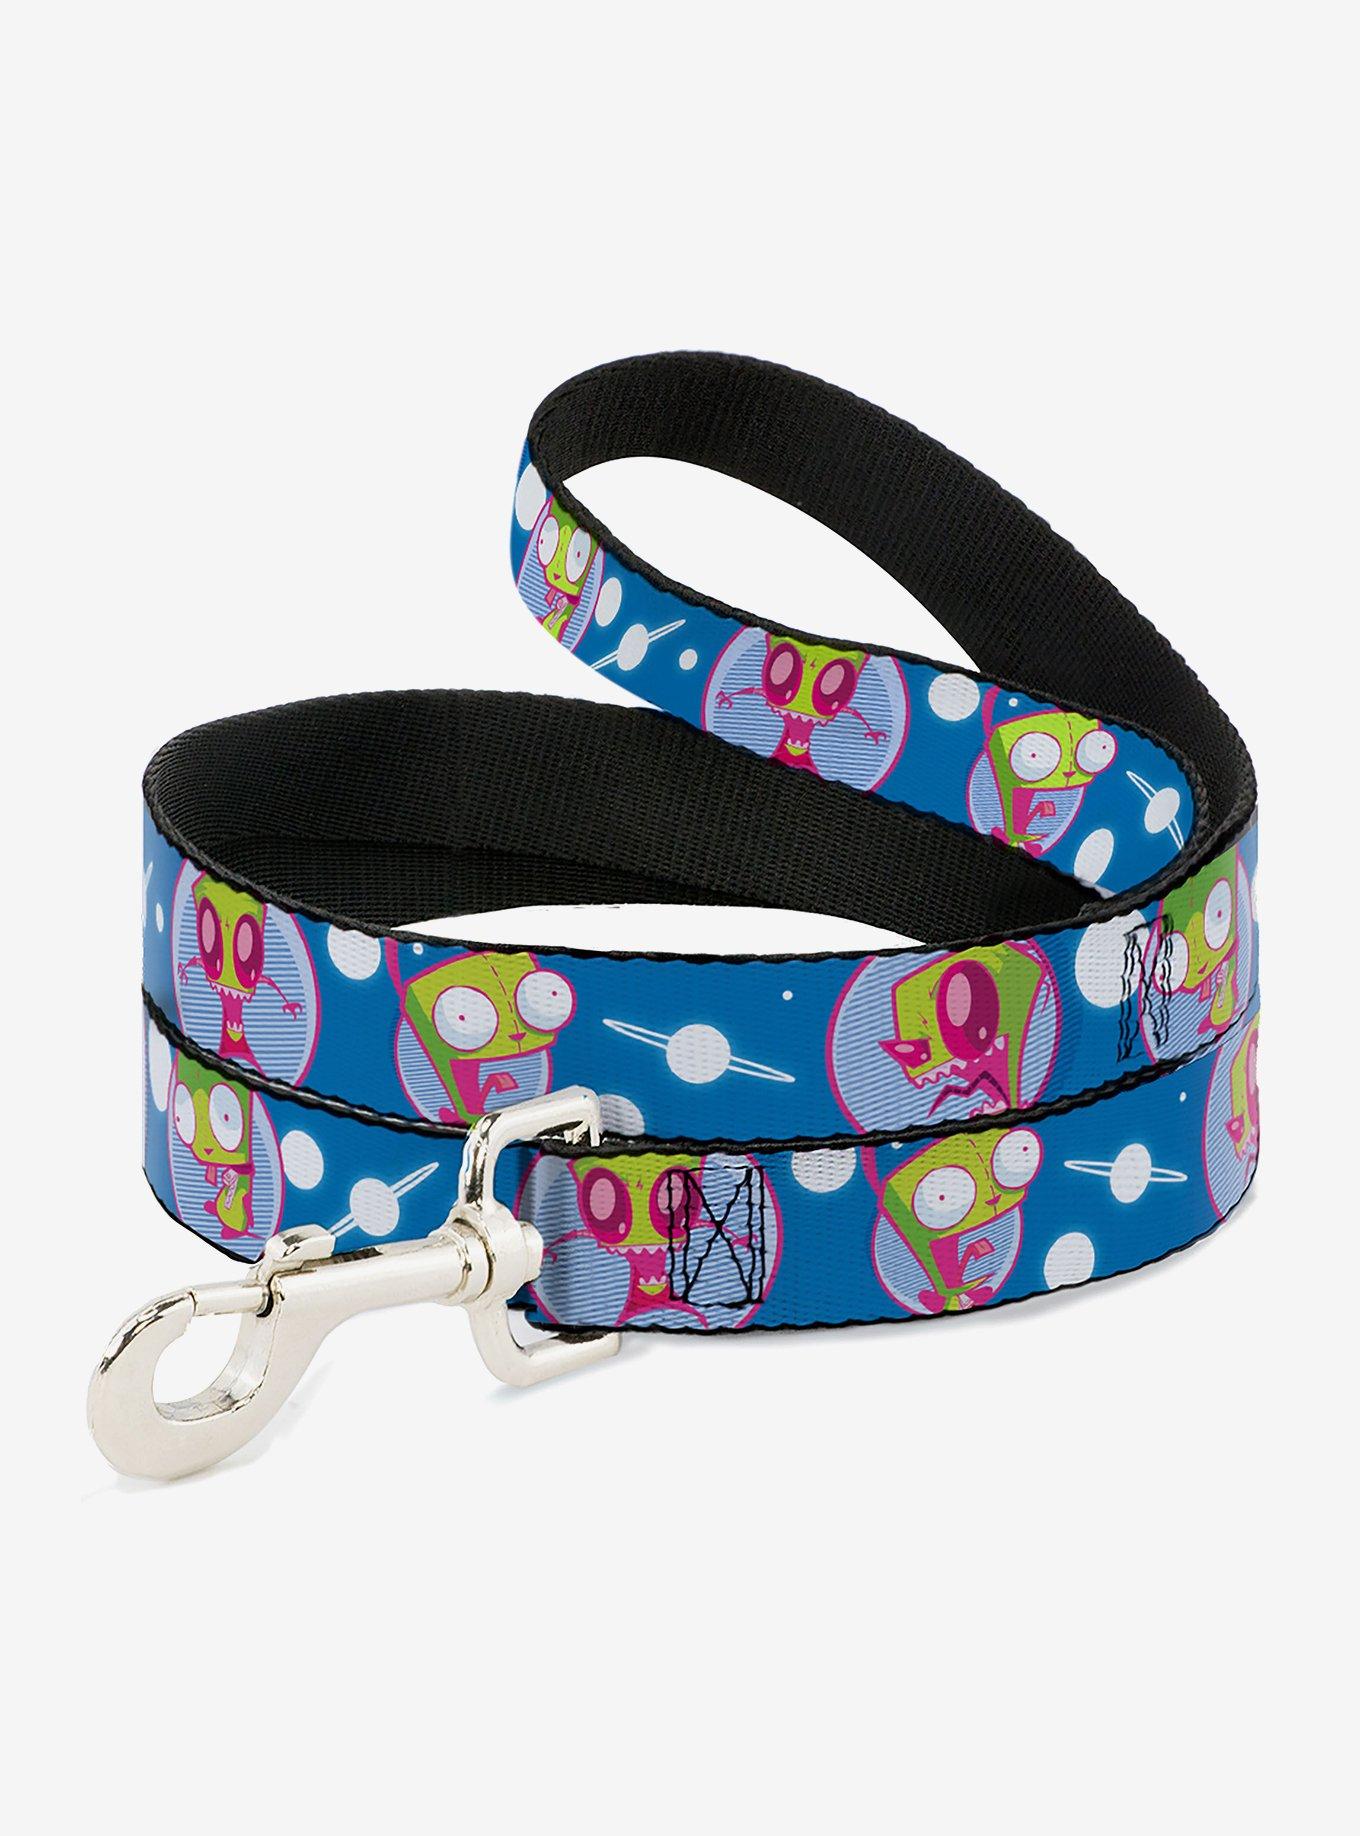 Invader Zim and GIR Poses and Planets Dog Leash, BLUE, hi-res